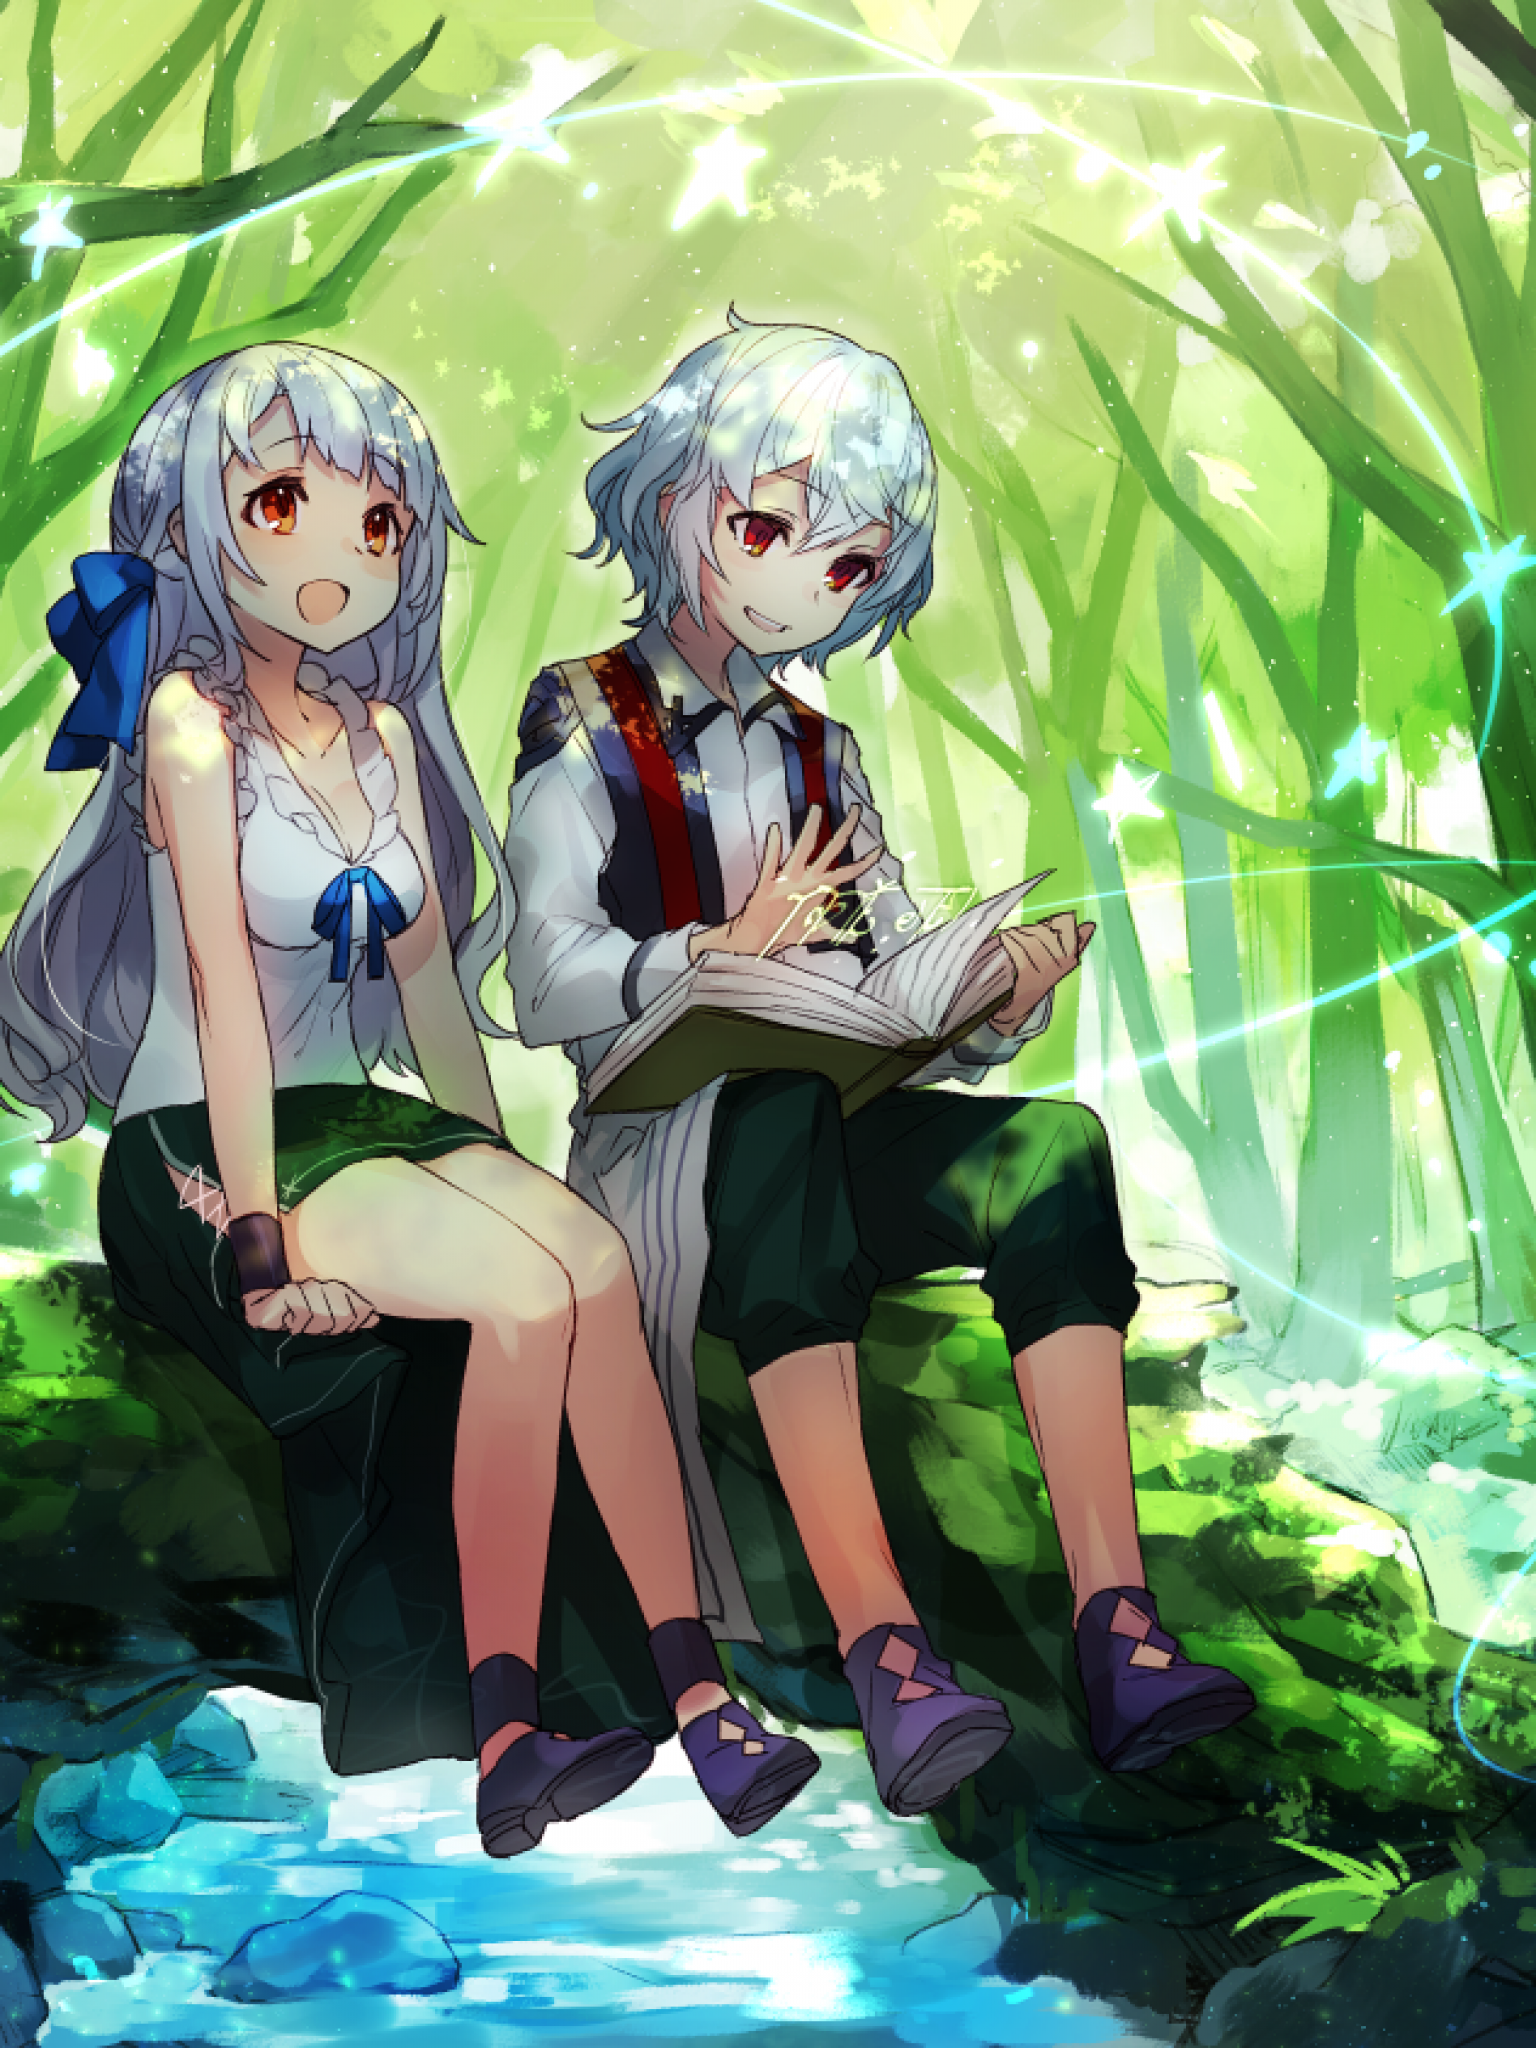 Download 1536x2048 Anime Twins, Girl And Boy, Forest, Reading A Book, Landscape Wallpaper for Apple iPad Mini, Apple IPad 4